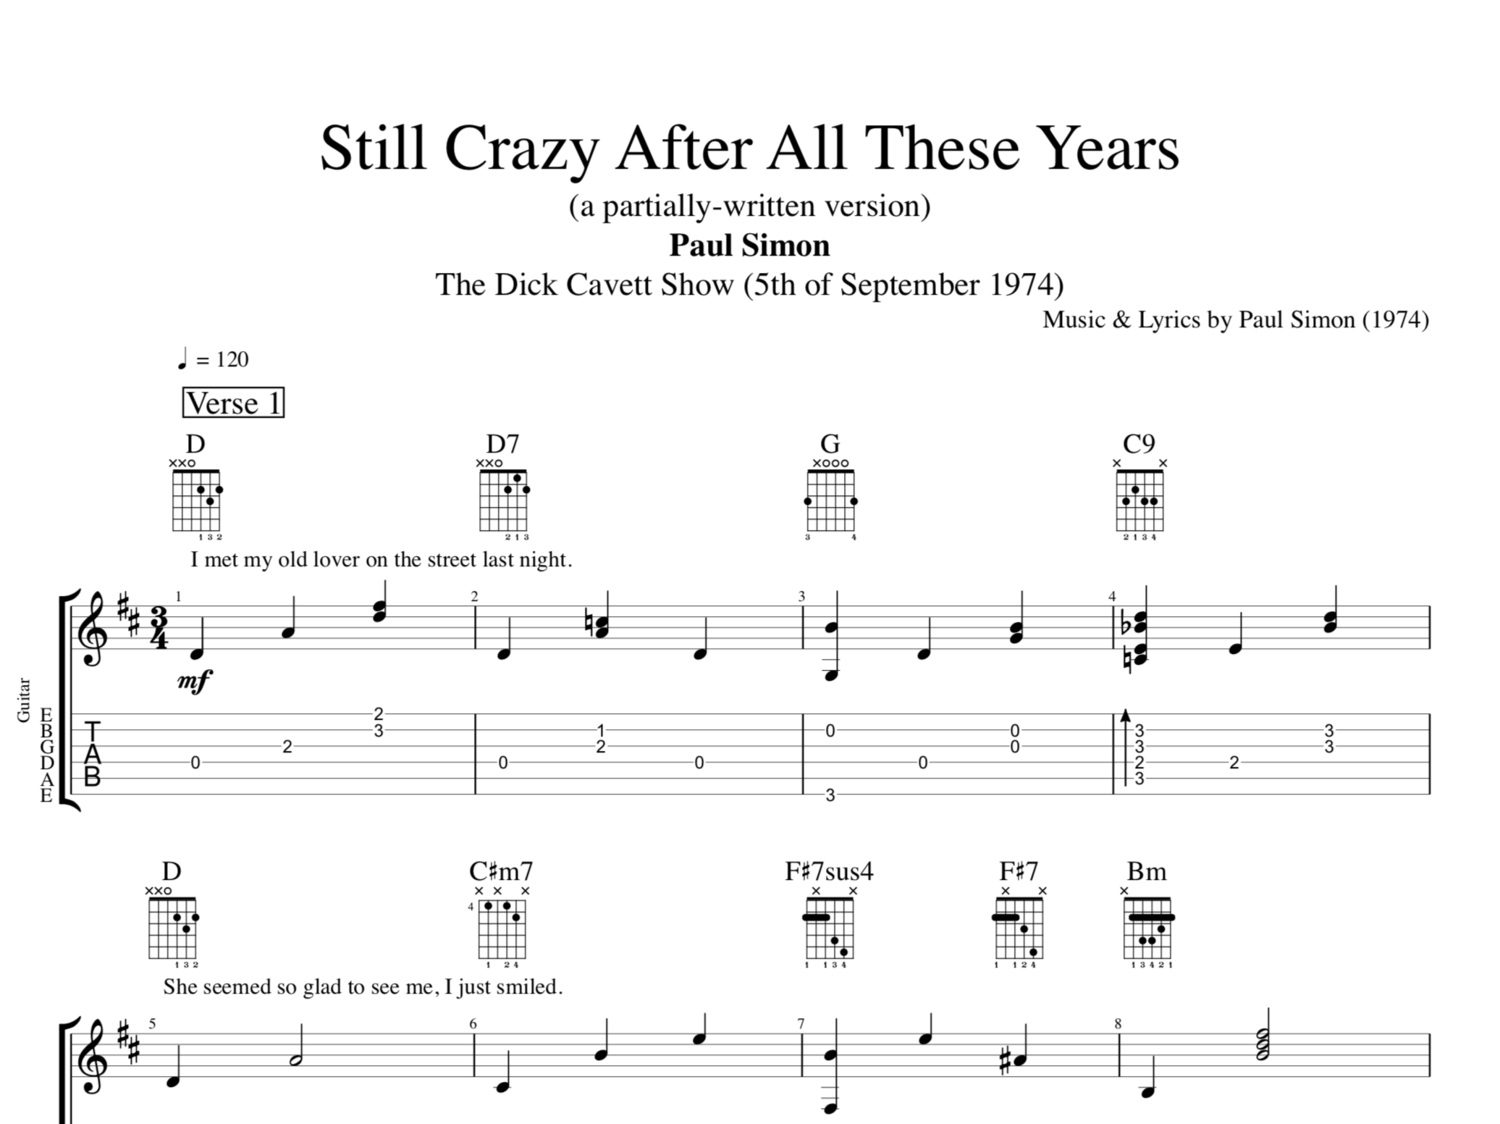 Still Crazy After All These Years Partially Written Paul Simon Guitar Tab Chords Lyrics Sheet Music Play Like The Greats Com